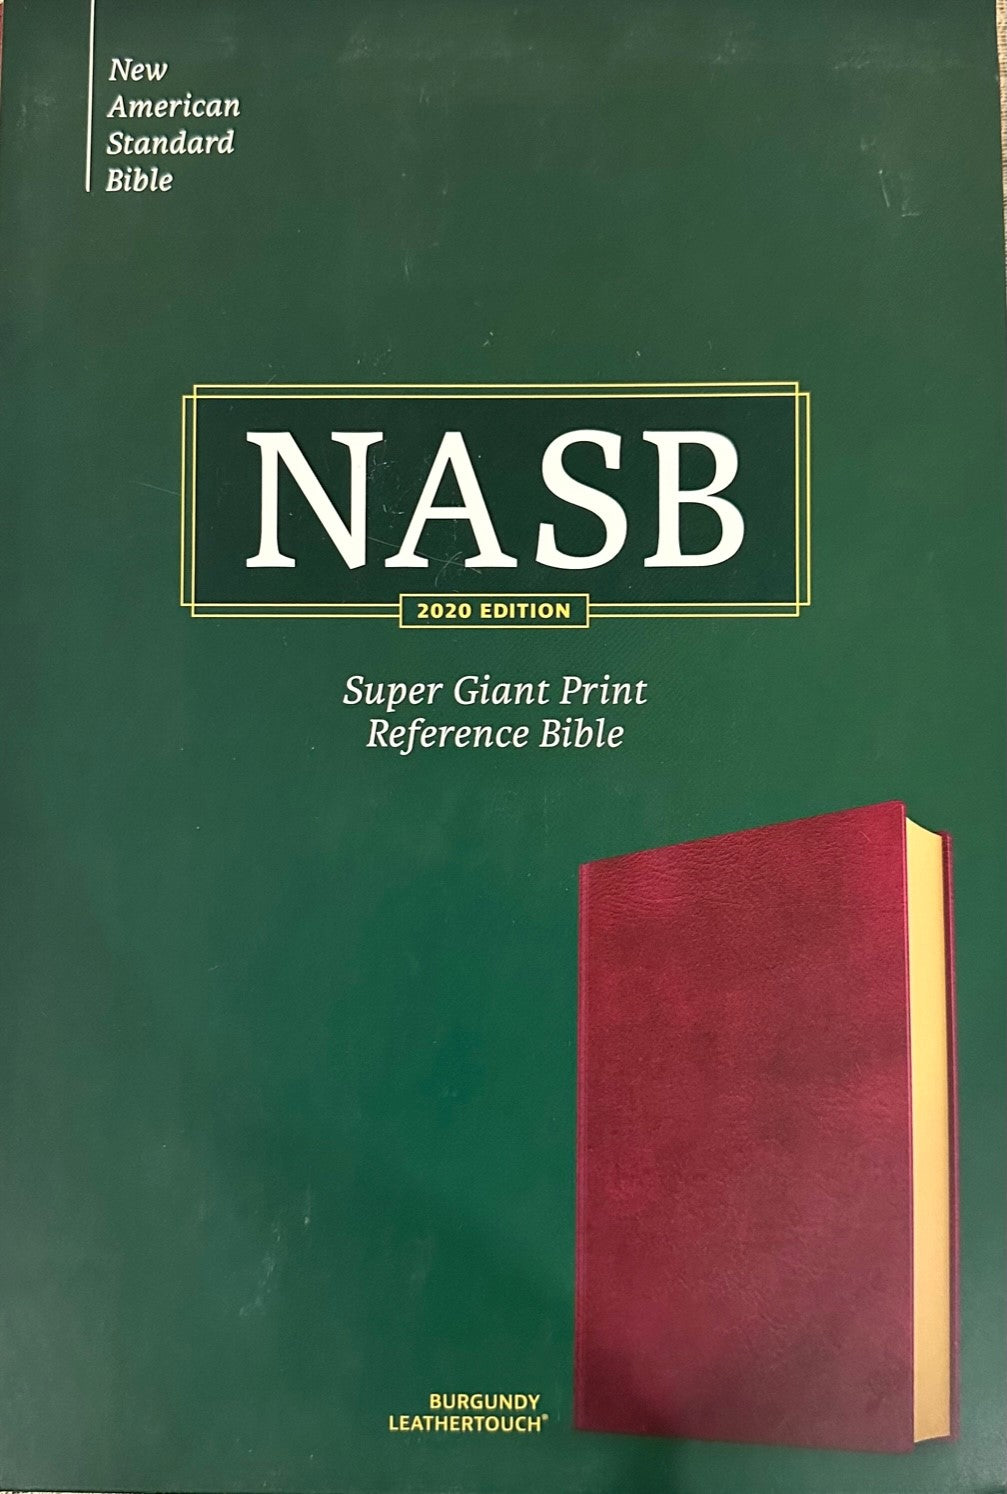 NASB 2020 Super Giant Print Reference Bible - Burgandy Leathertouch